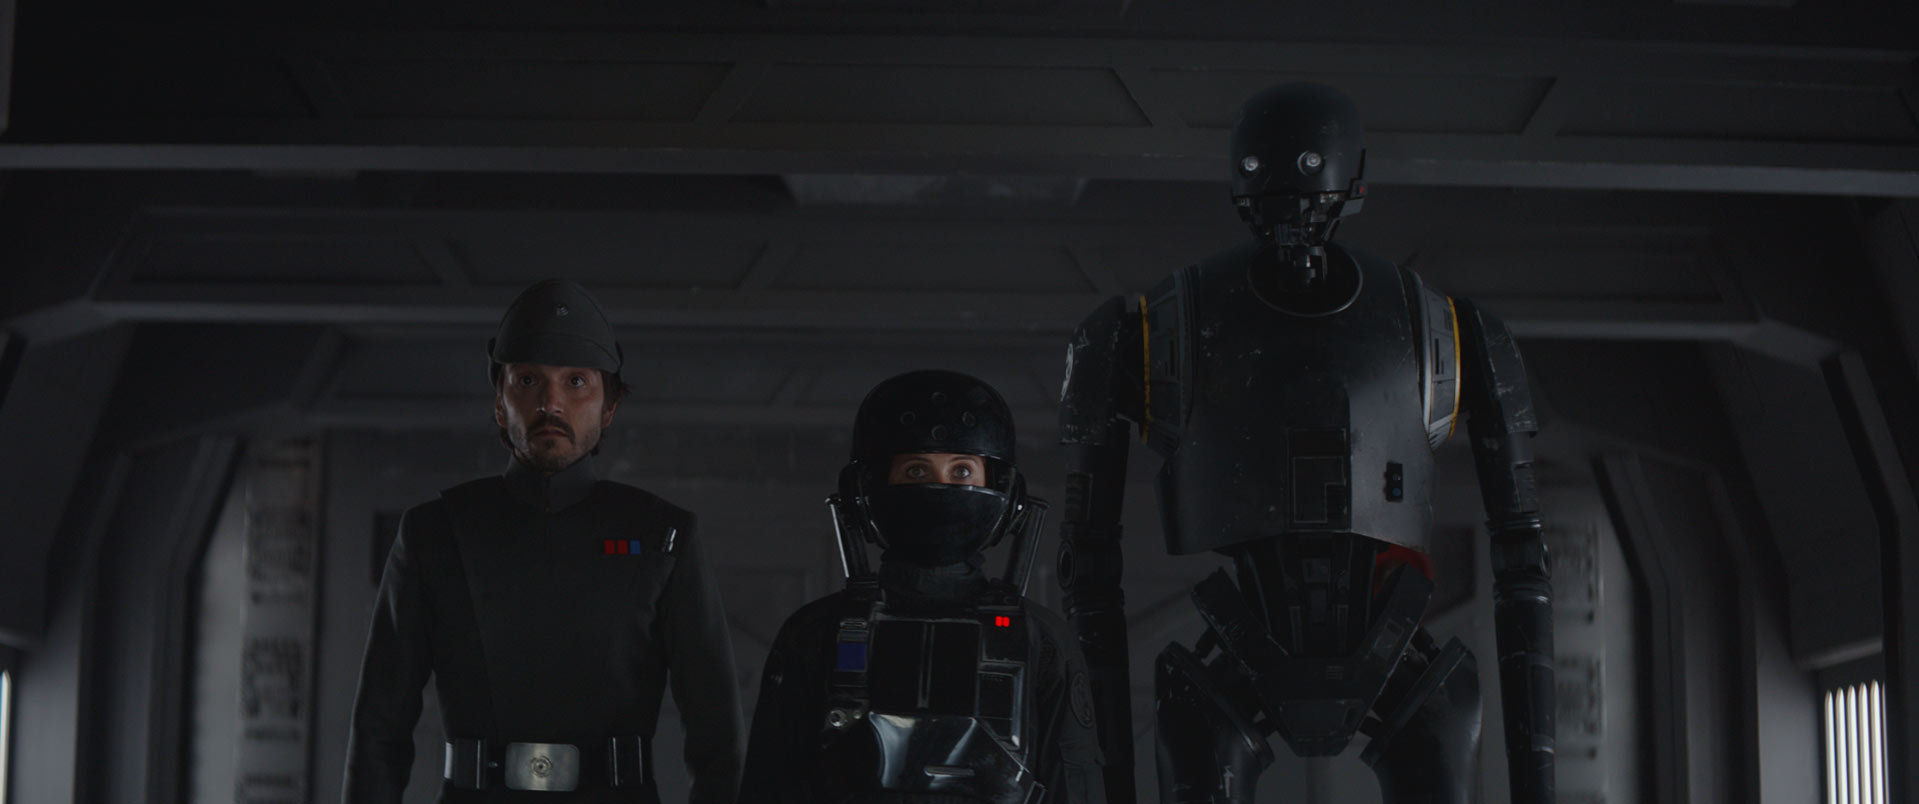 rogue-one-story-gallery-an1-ff-000068 7a1f7bd